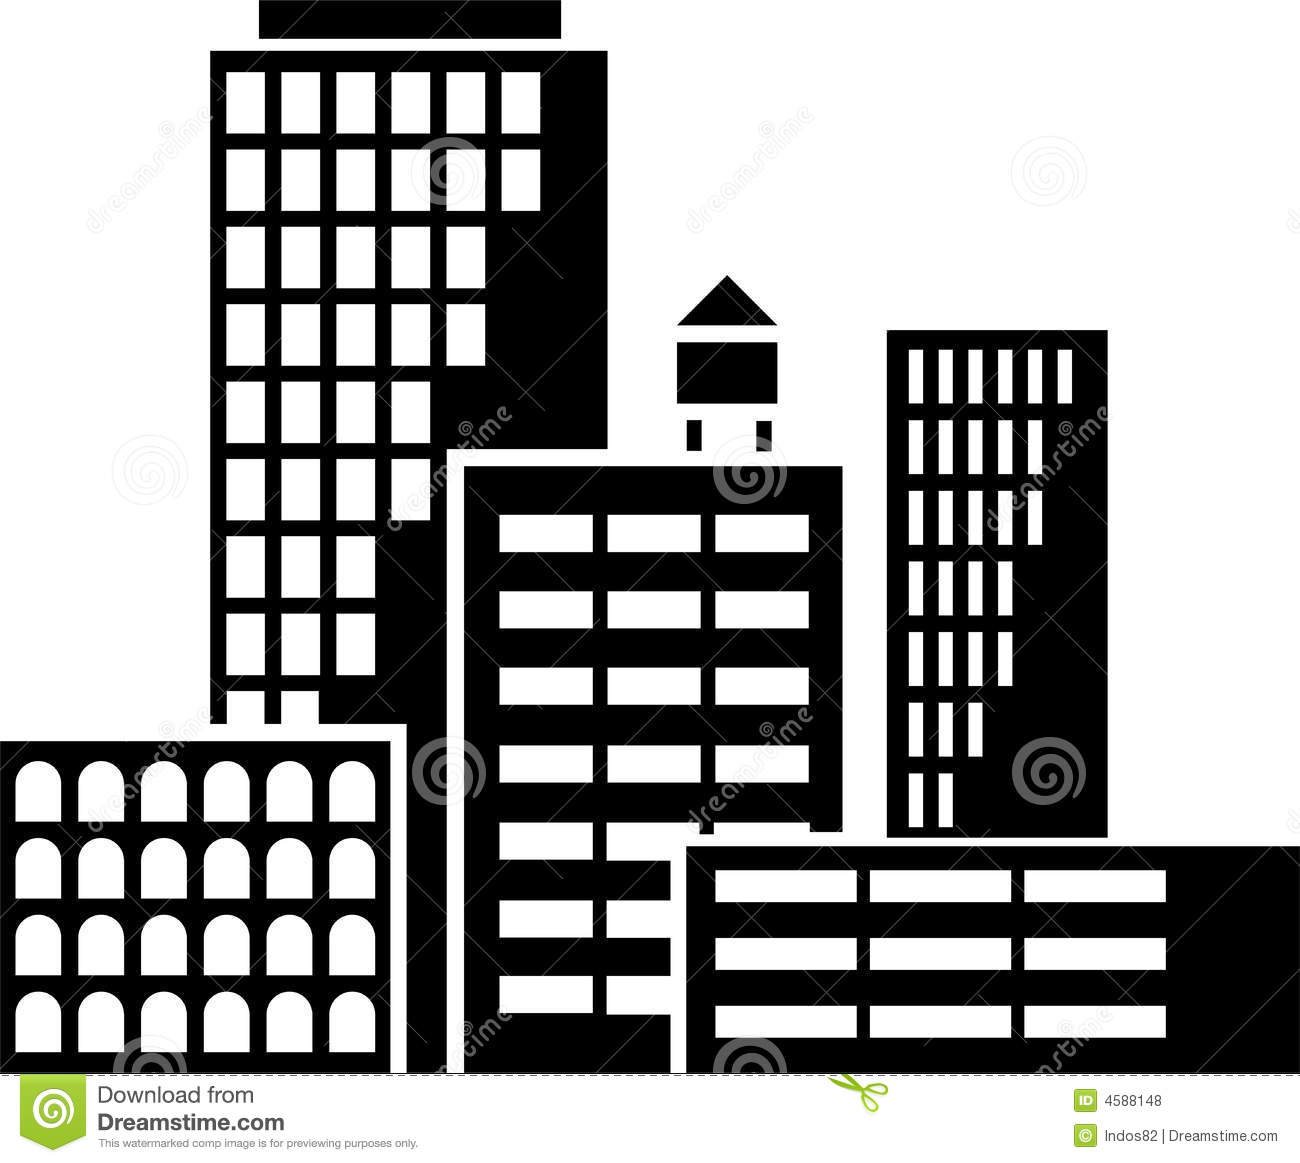 Free Black and White Vector Building